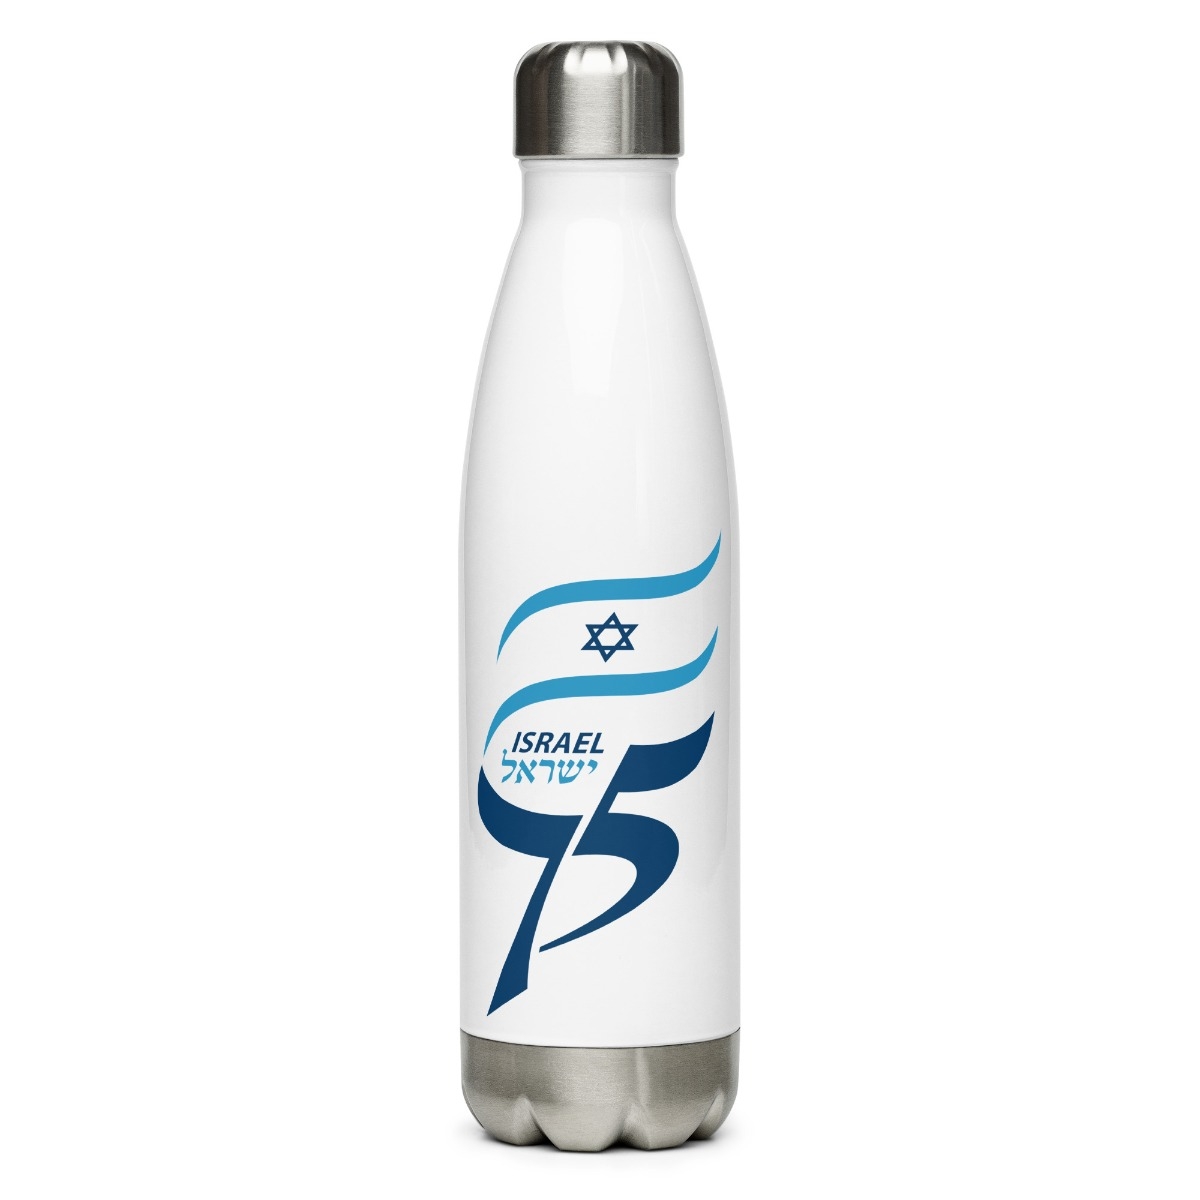 https://www.judaicawebstore.com/media/catalog/product/cache/54e028c734839e76288222a68a65f1c3/s/t/stainless-steel-water-bottle-white-17oz-front-643bcf1a545cb.jpg